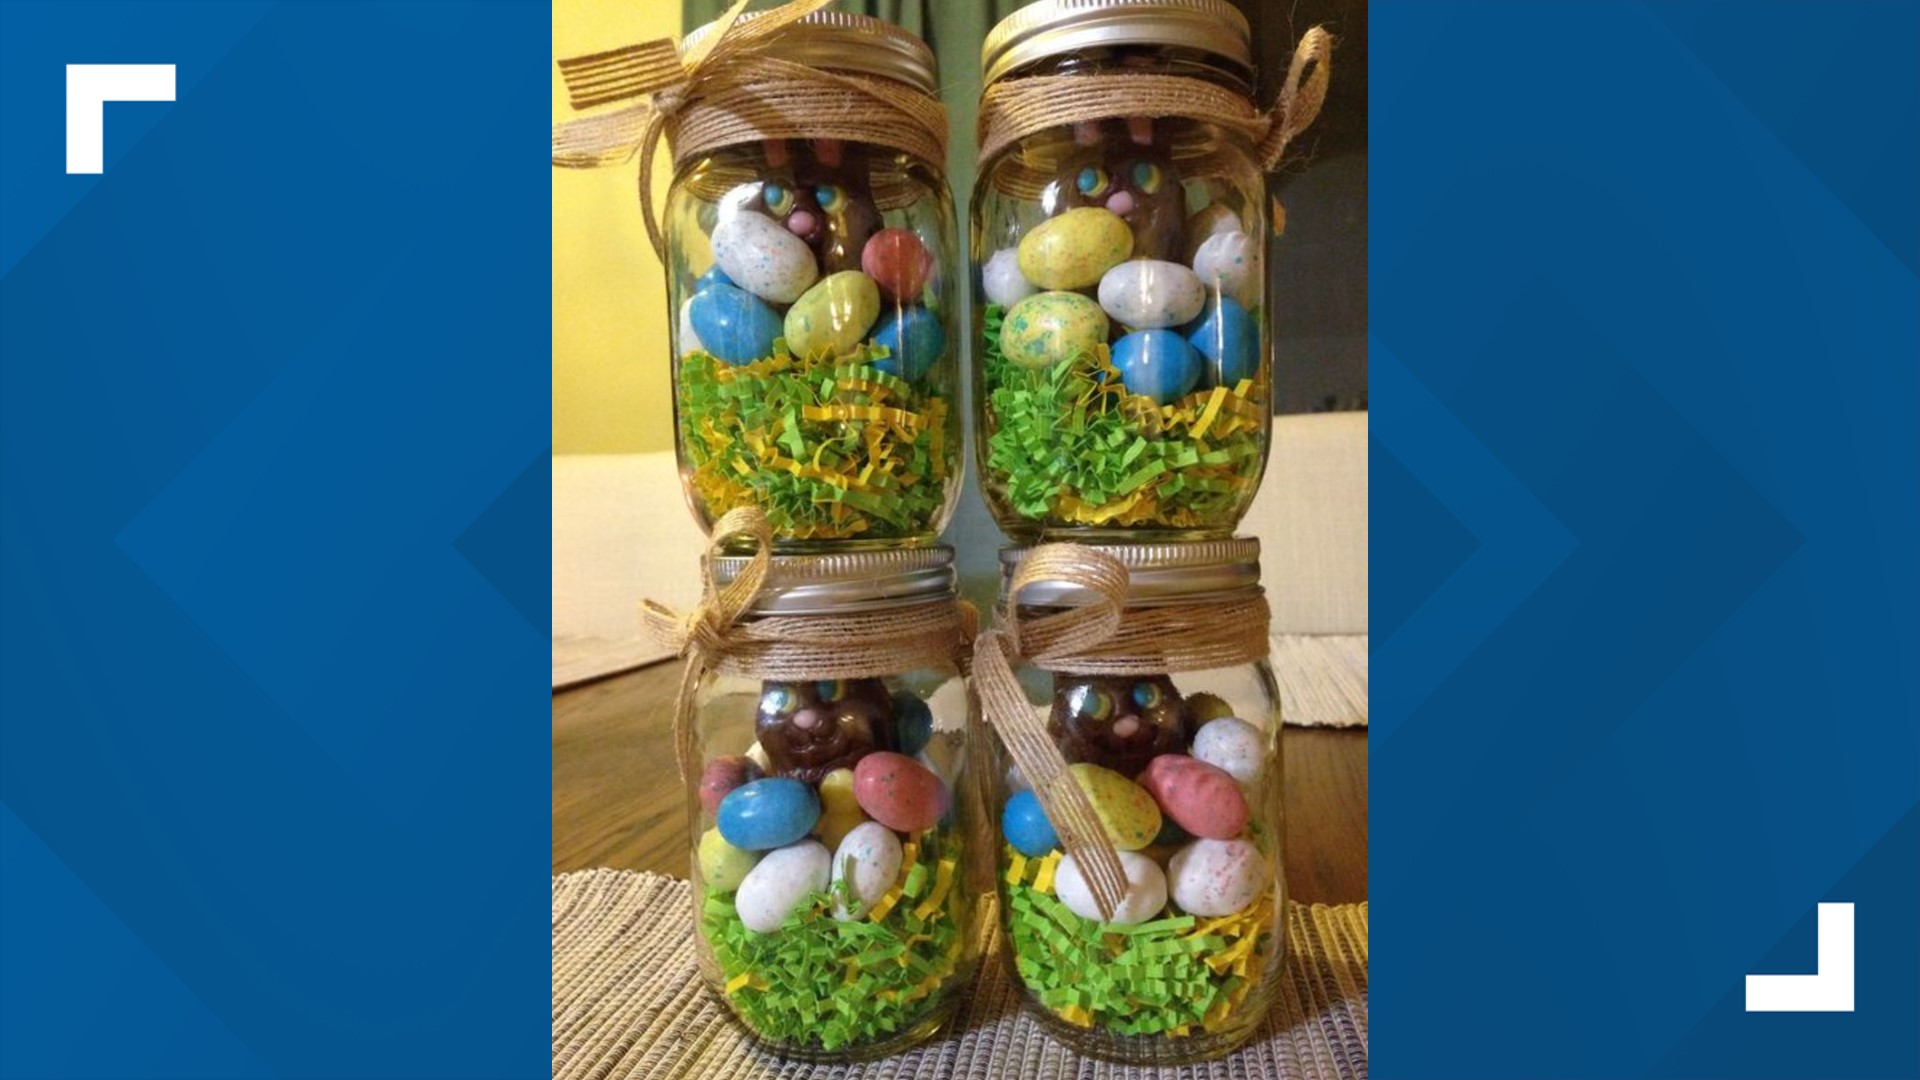 Crafting, candy and children: Party Host Helpers offers ideas to get kids engaged in the upcoming Easter holiday.